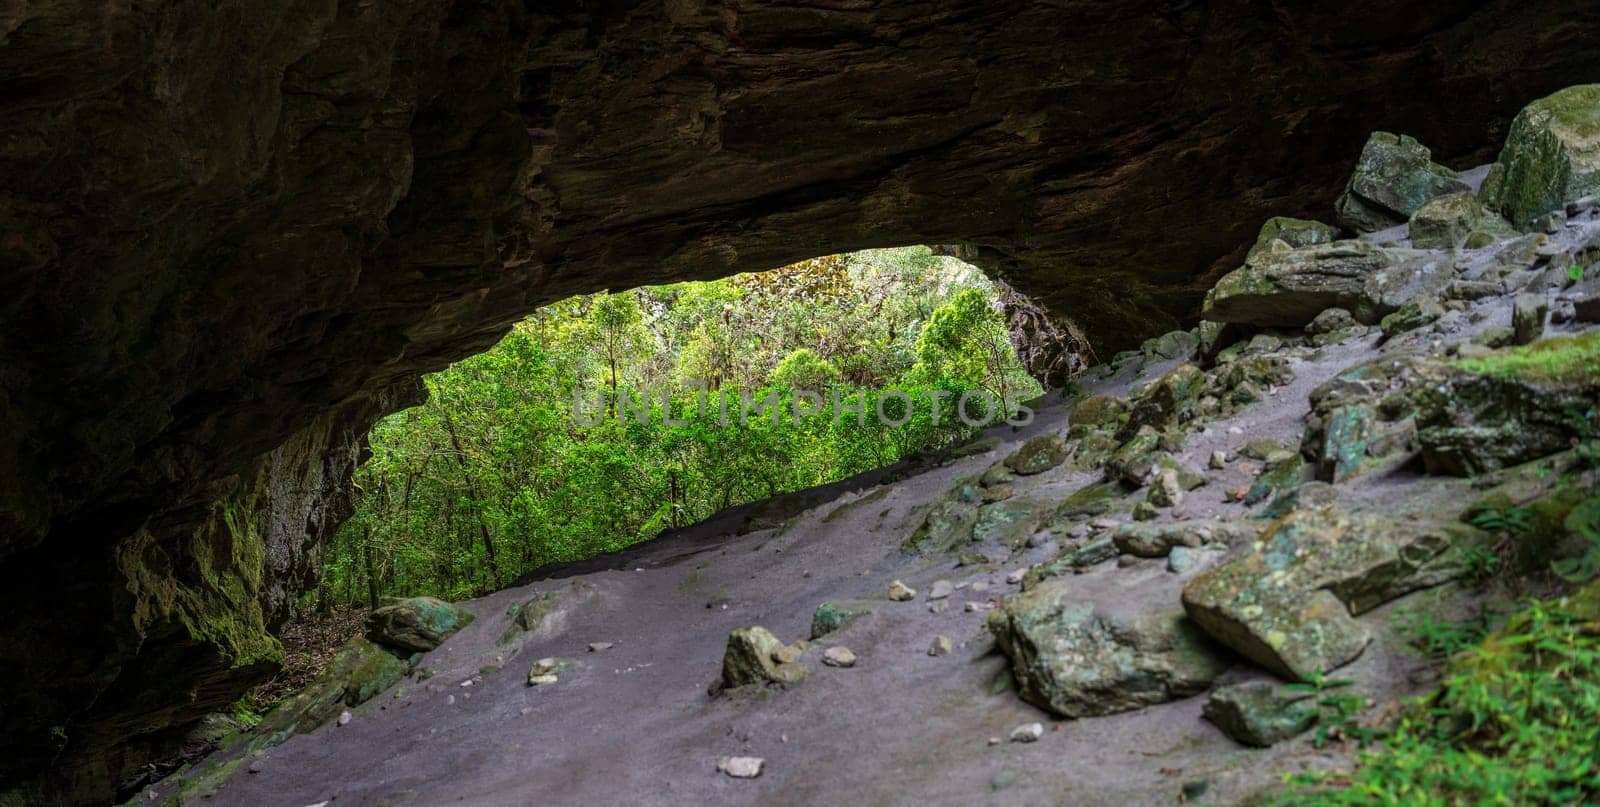 Tranquil cave entrance showcases a lush forest.